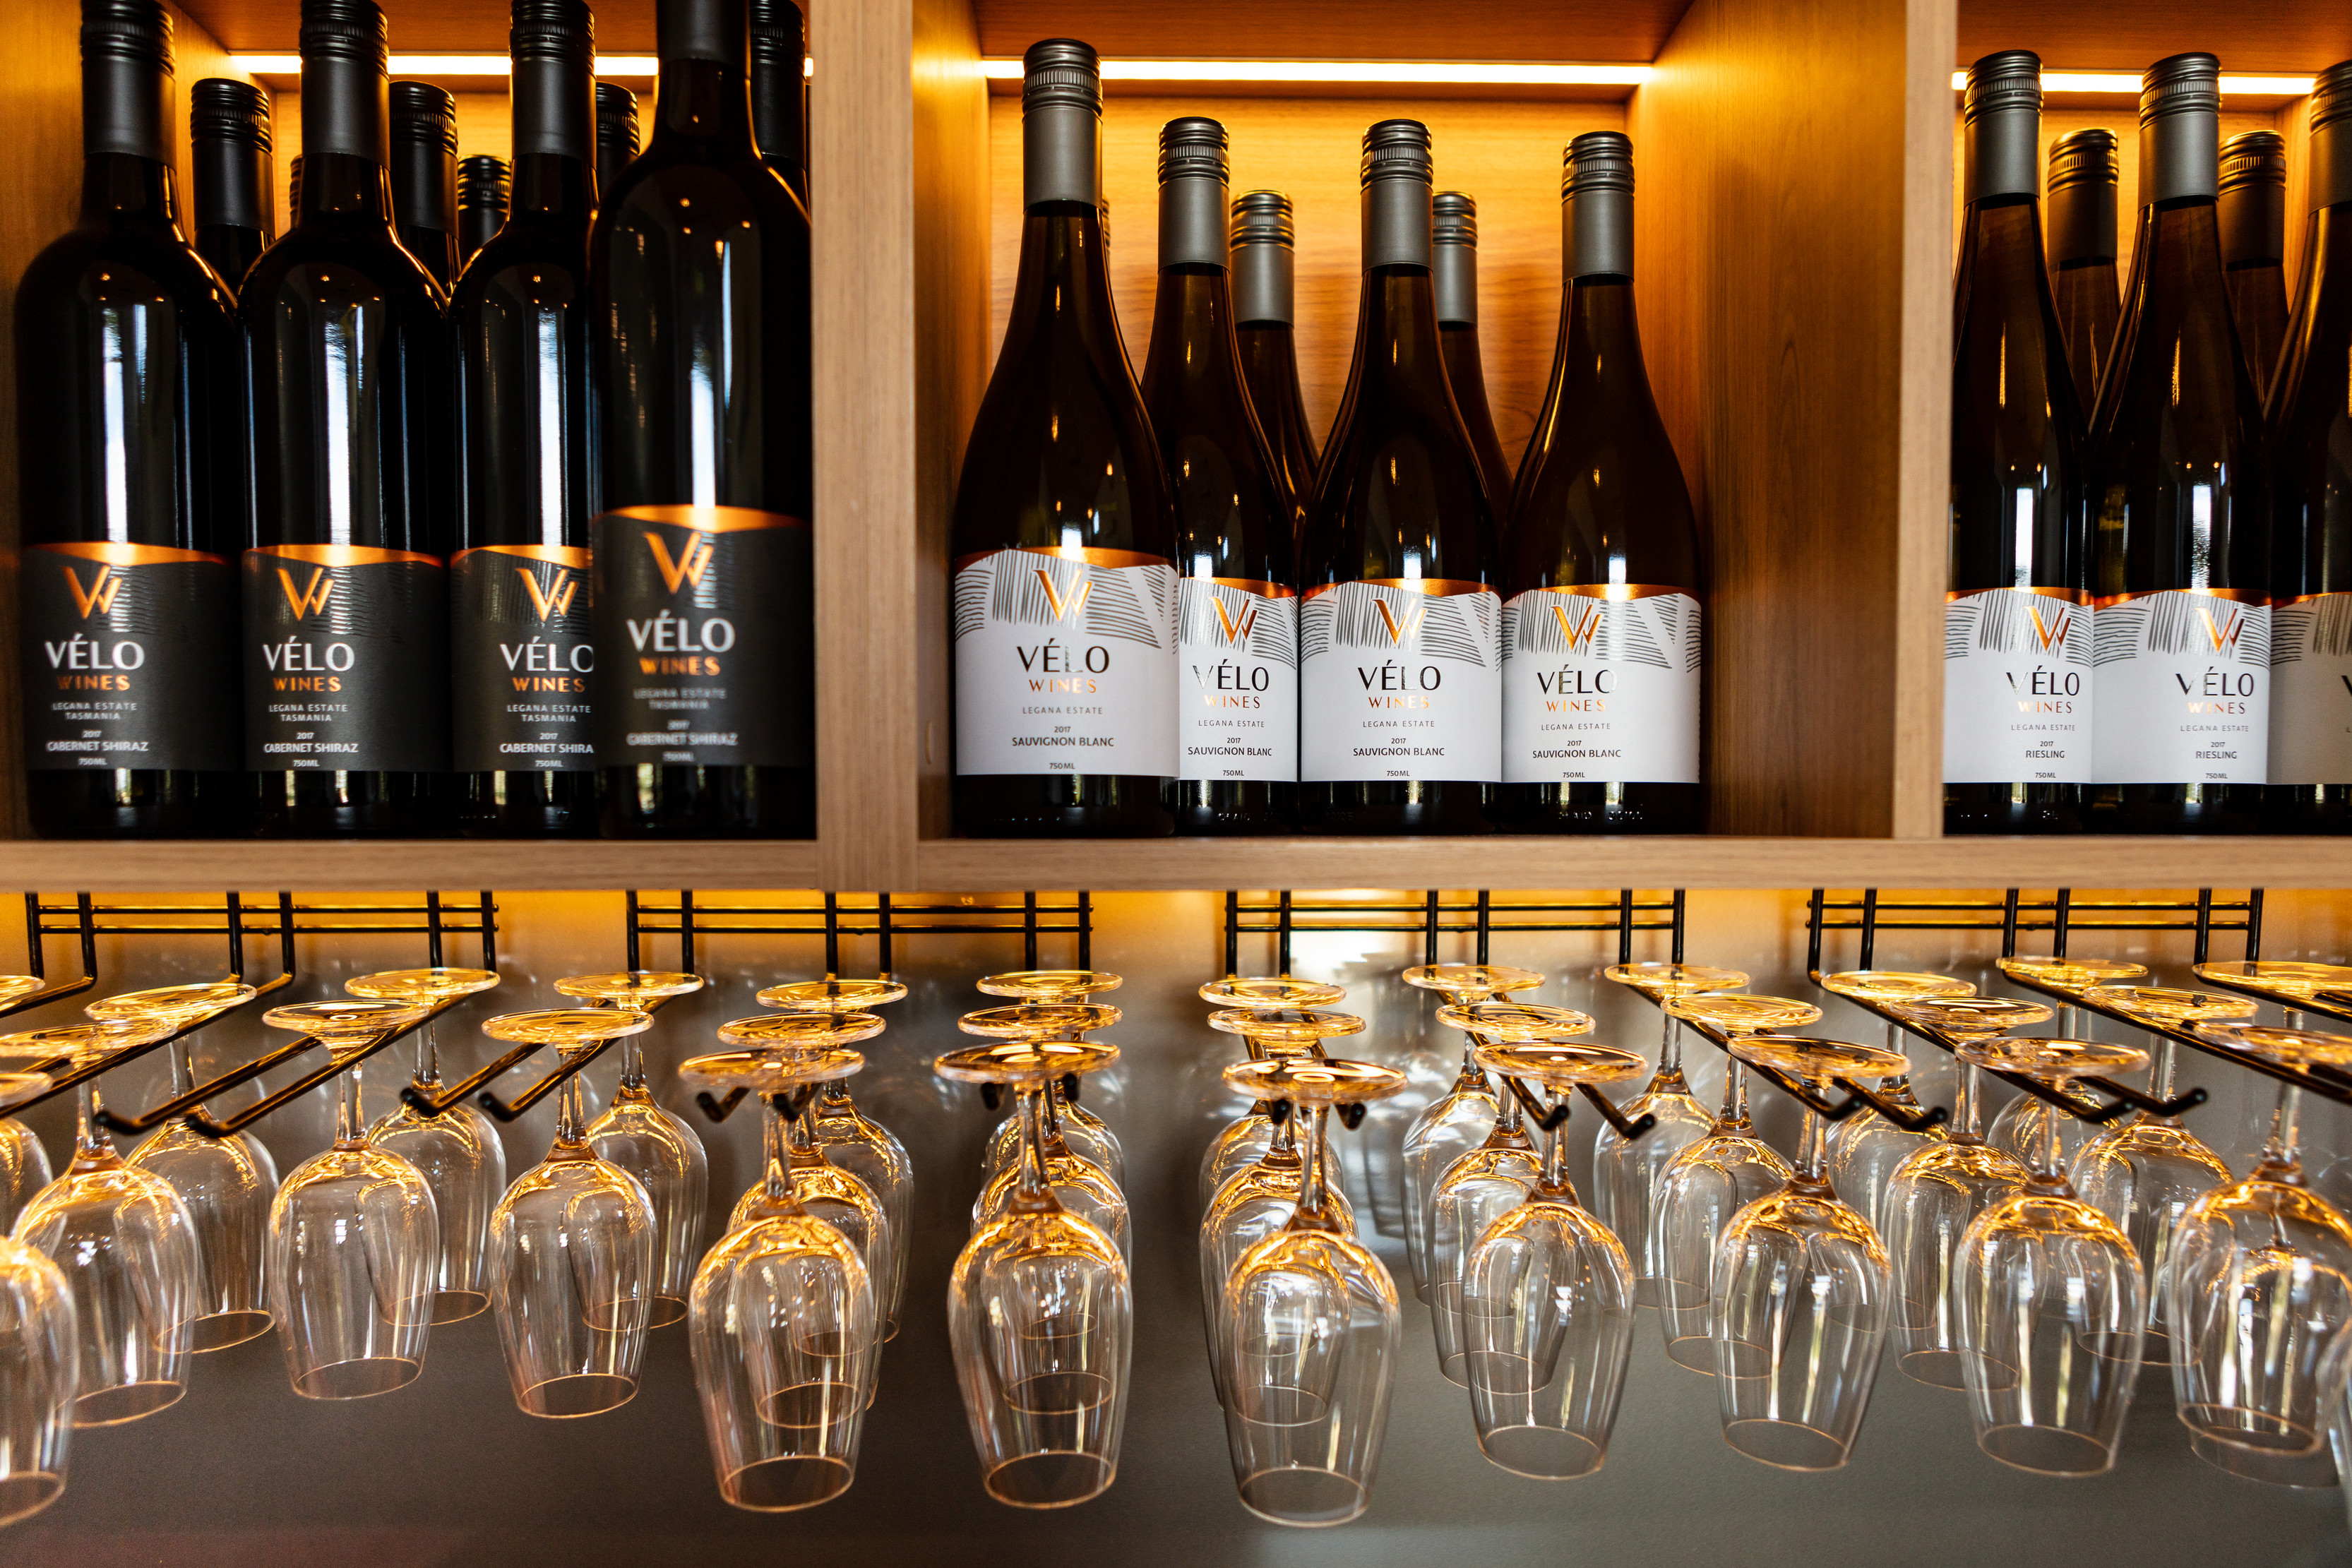 A variety of Velo wines sit above in shelves as wine glasses hang underneath.